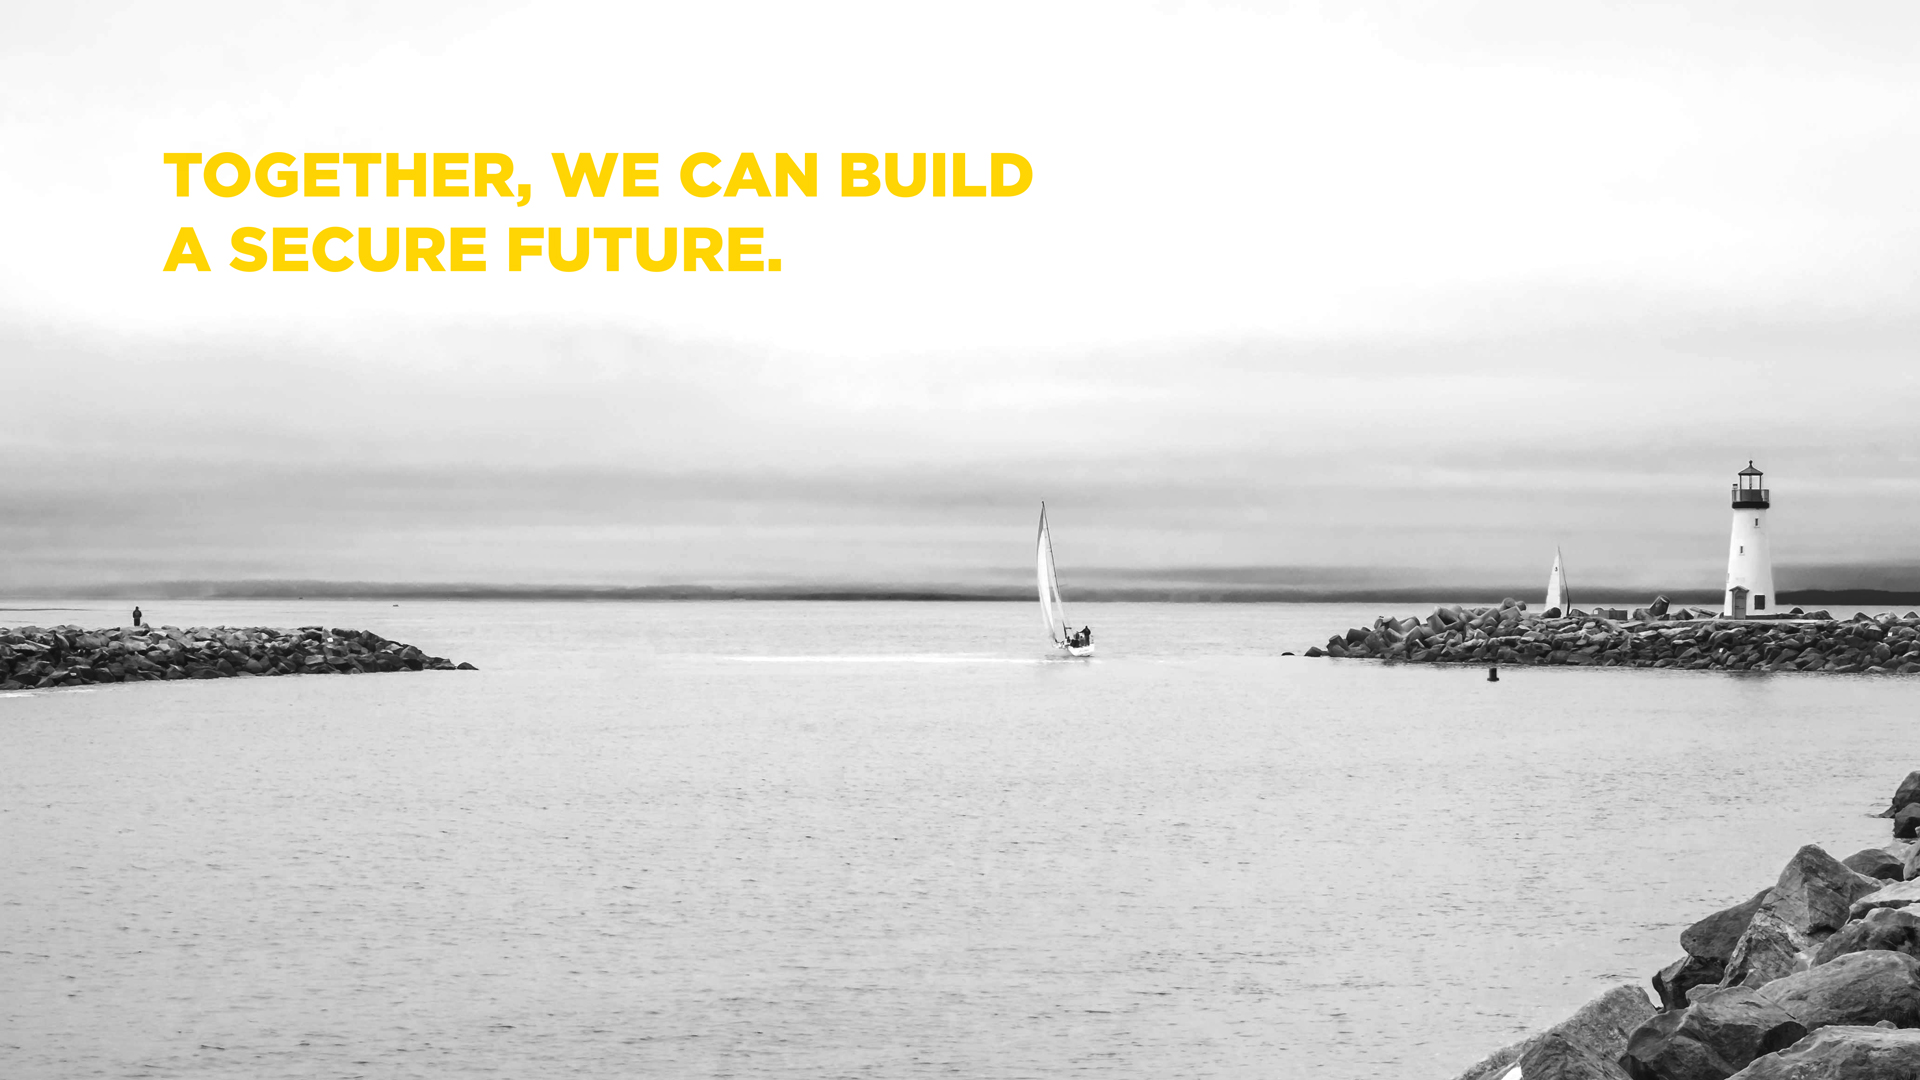 Together, we can build a secure future.